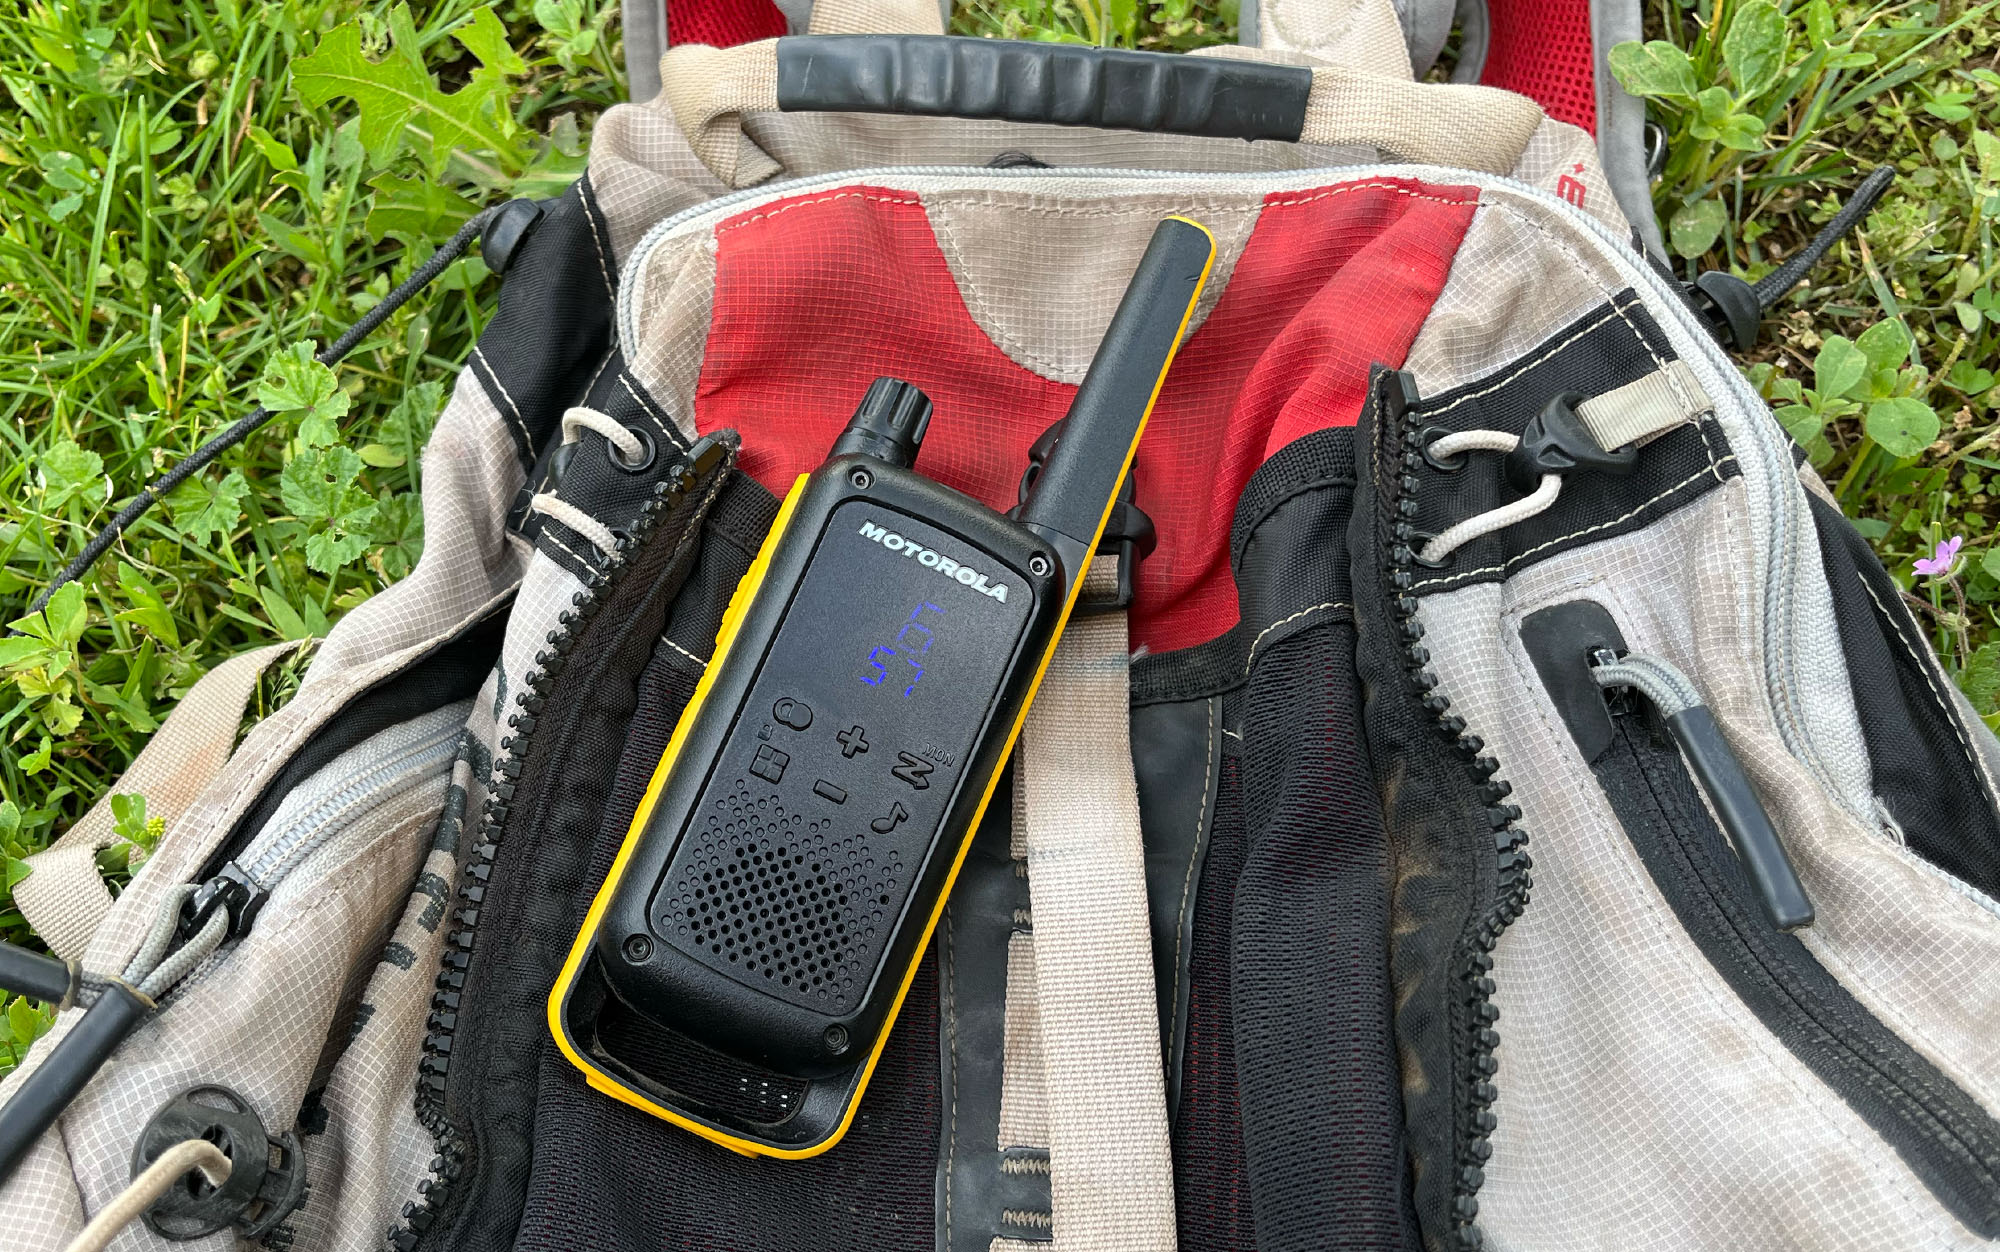 Motorola Talkabout T82 Extreme - 2 Way Radio (Review and Range Test) 